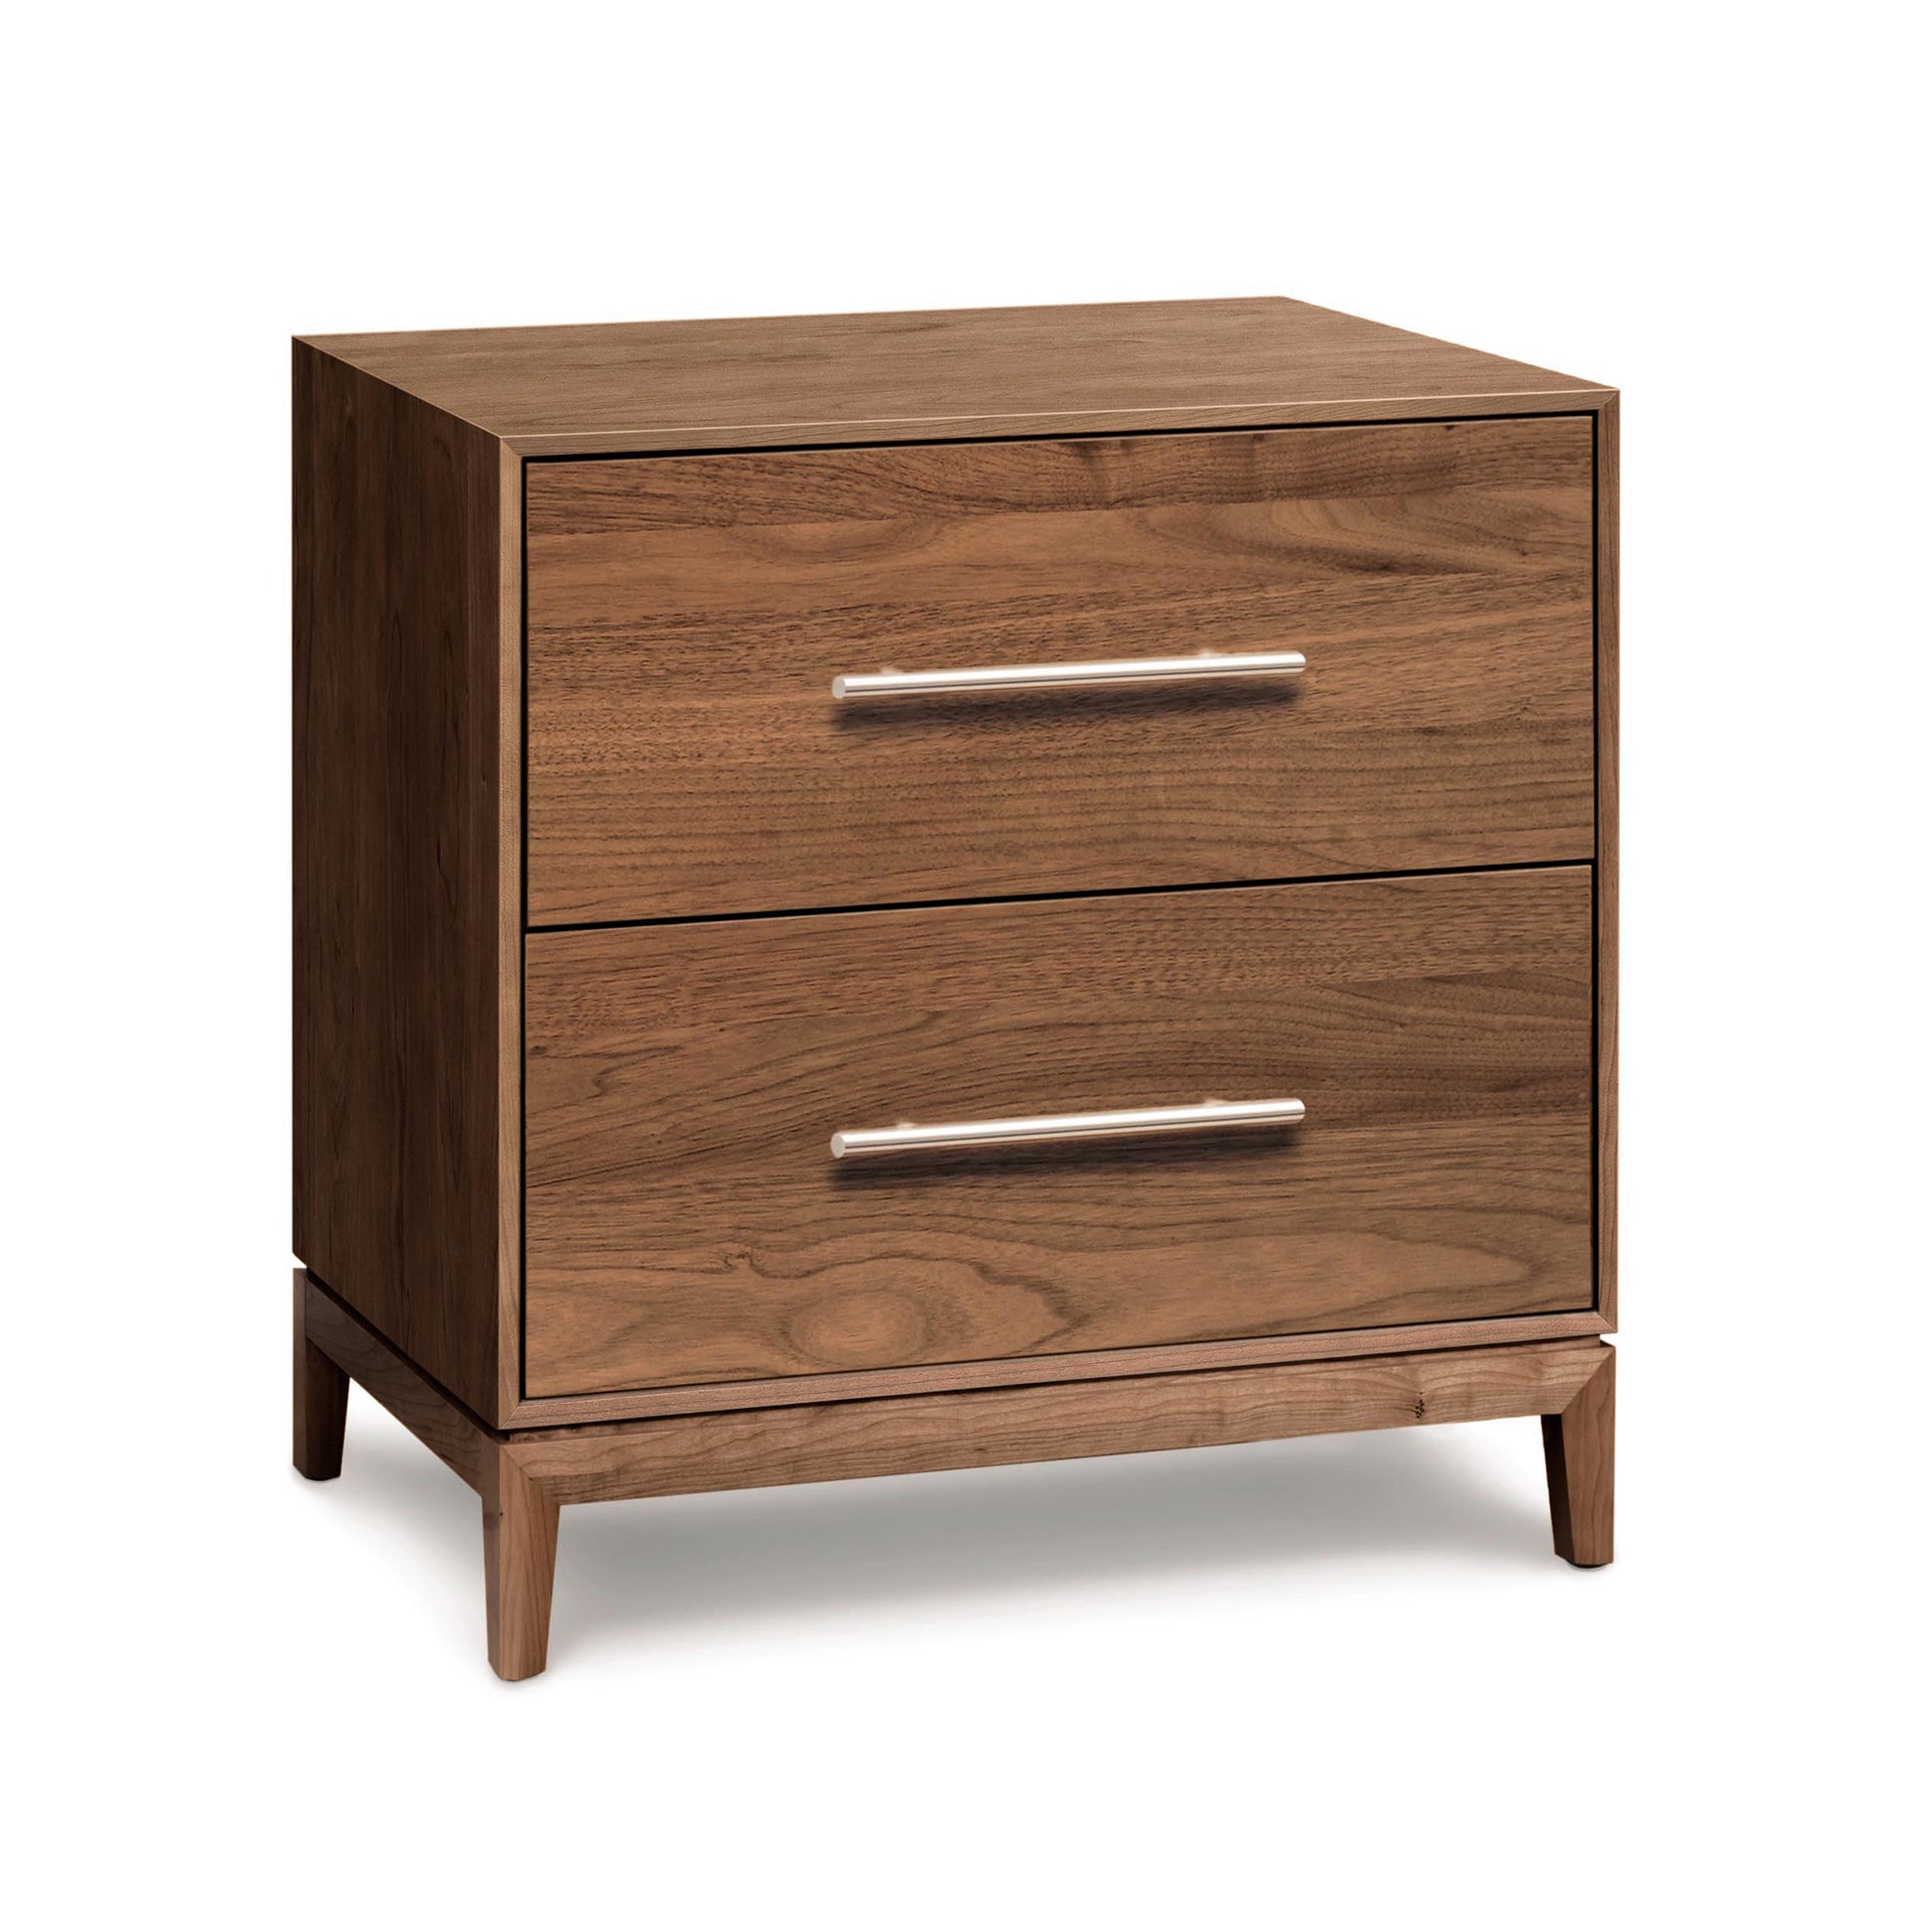 A Copeland Furniture Mansfield 2-Drawer Nightstand with a mitered frame and two drawers.